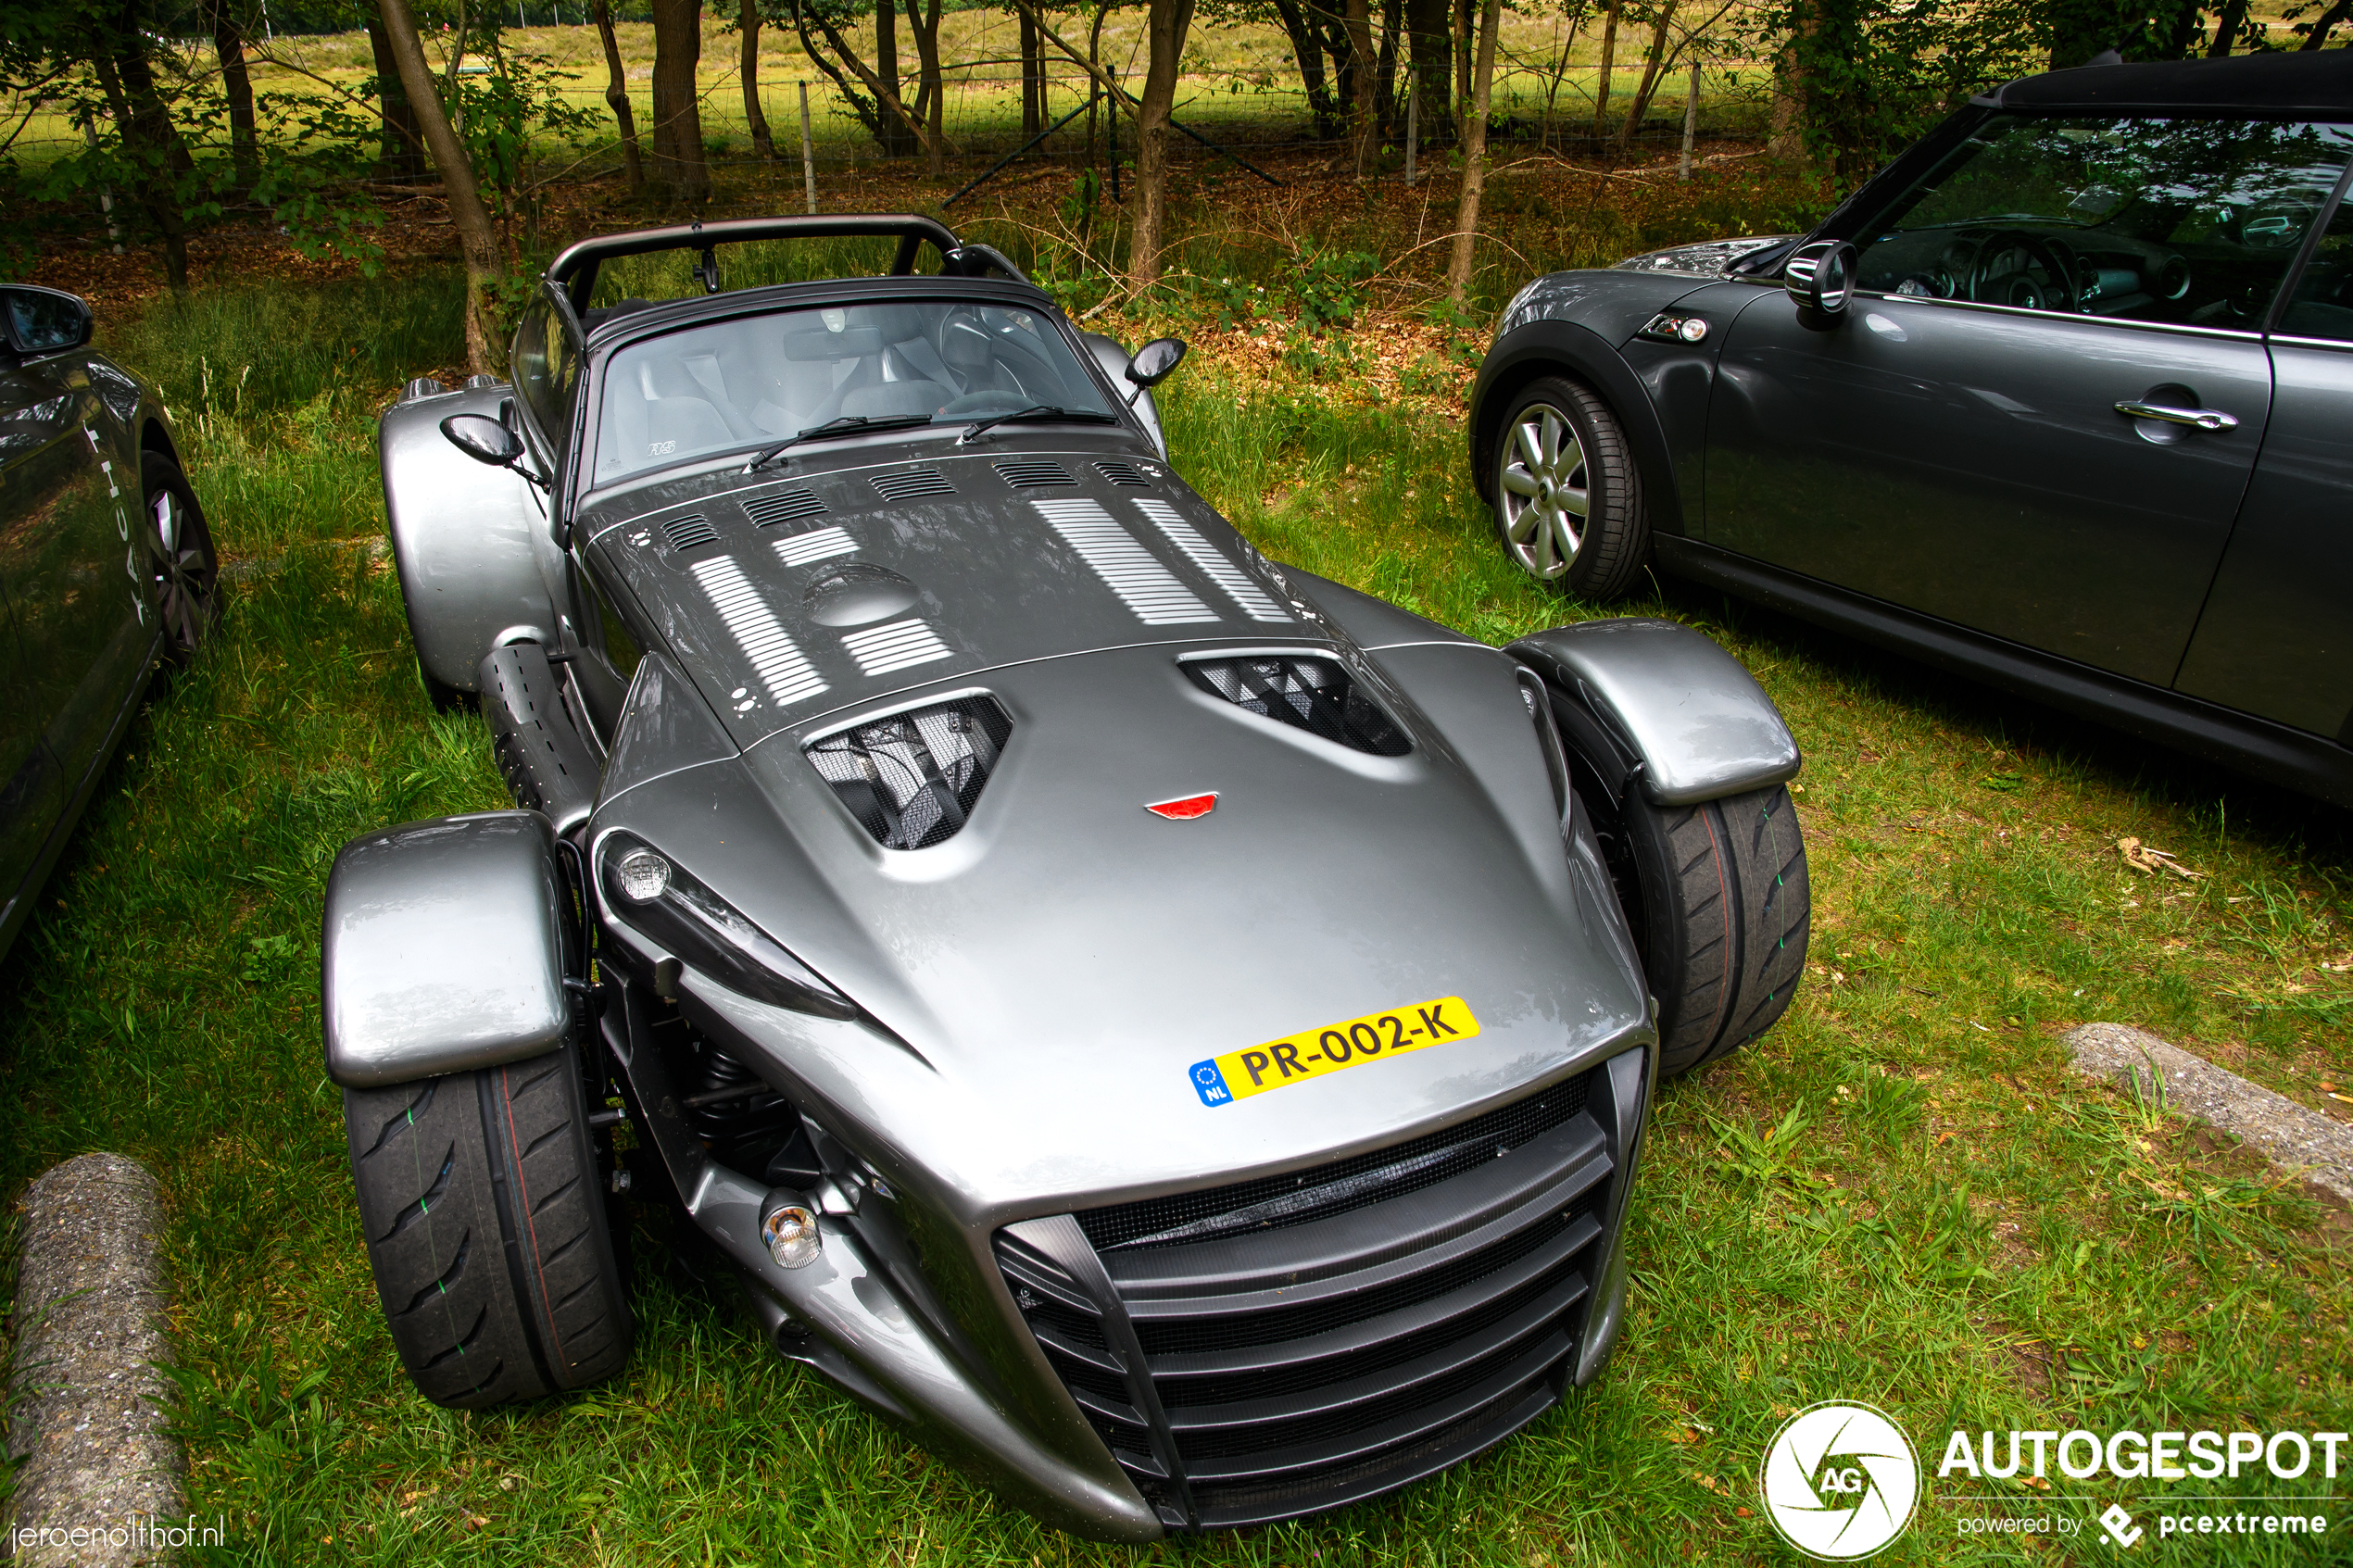 2018 Donkervoort D8 GTO 40